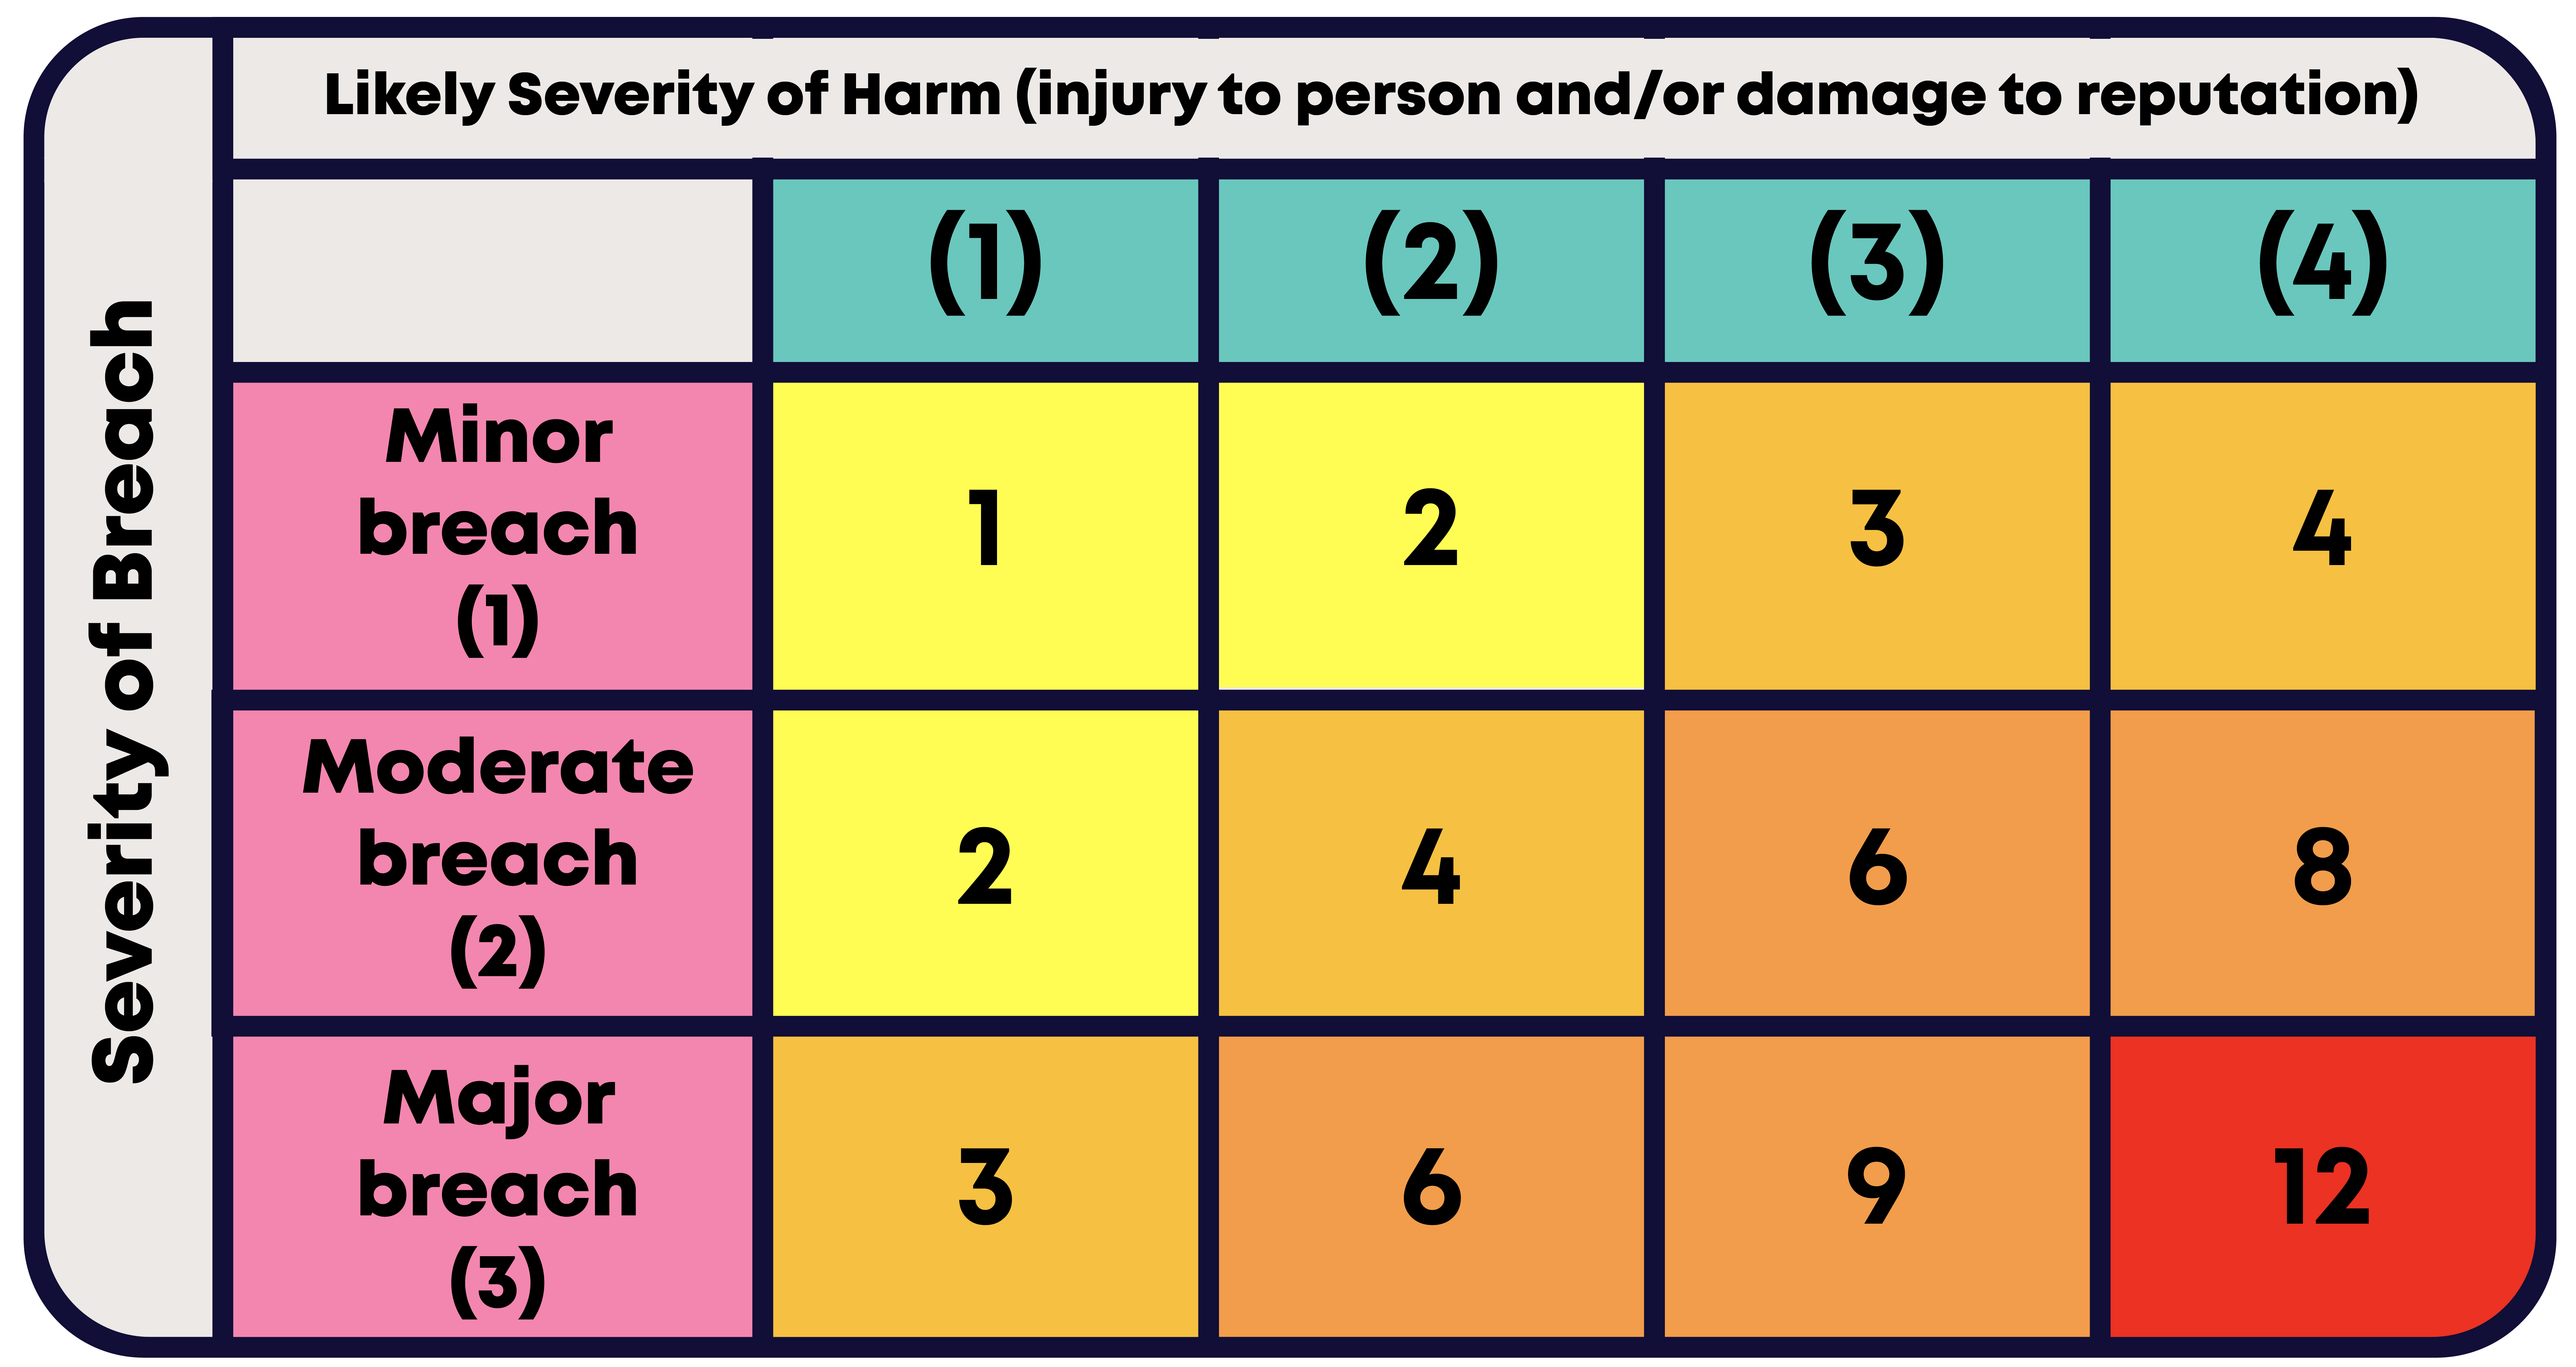 Table outlining severity of breach and likely severity of harm (injury to person and/or damage to reputation)